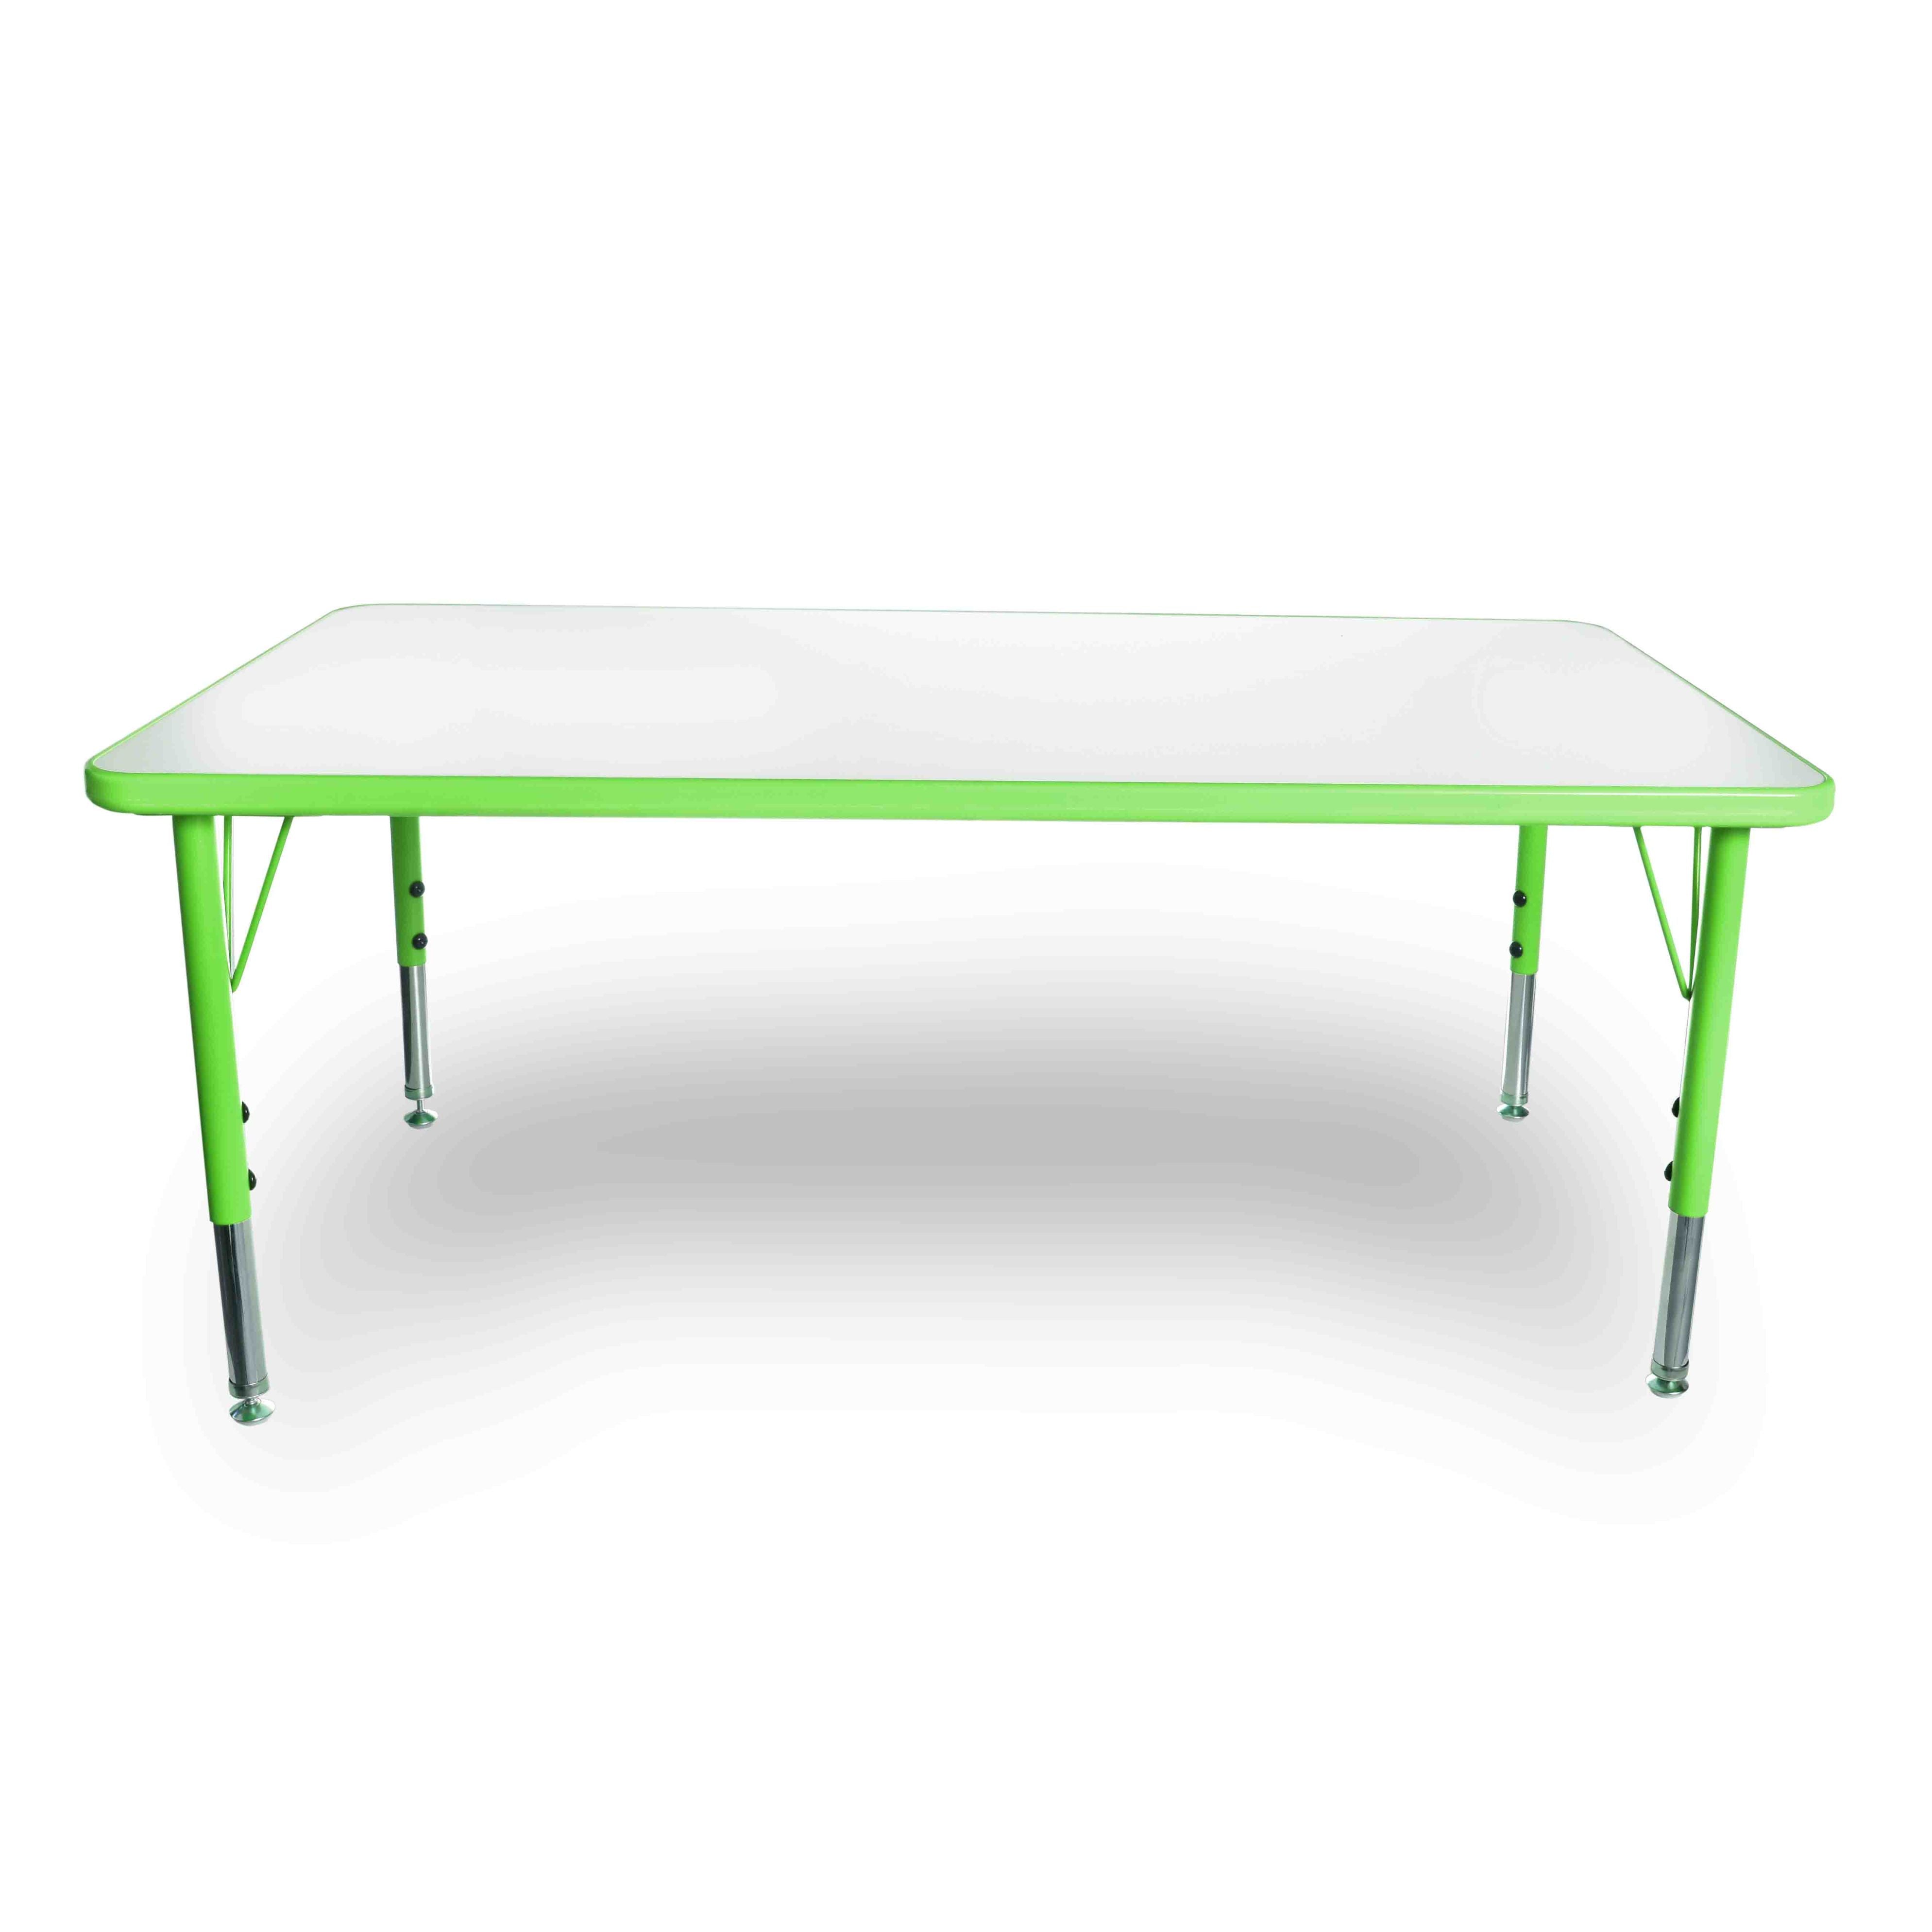 Kidicare Table Rectangulaire